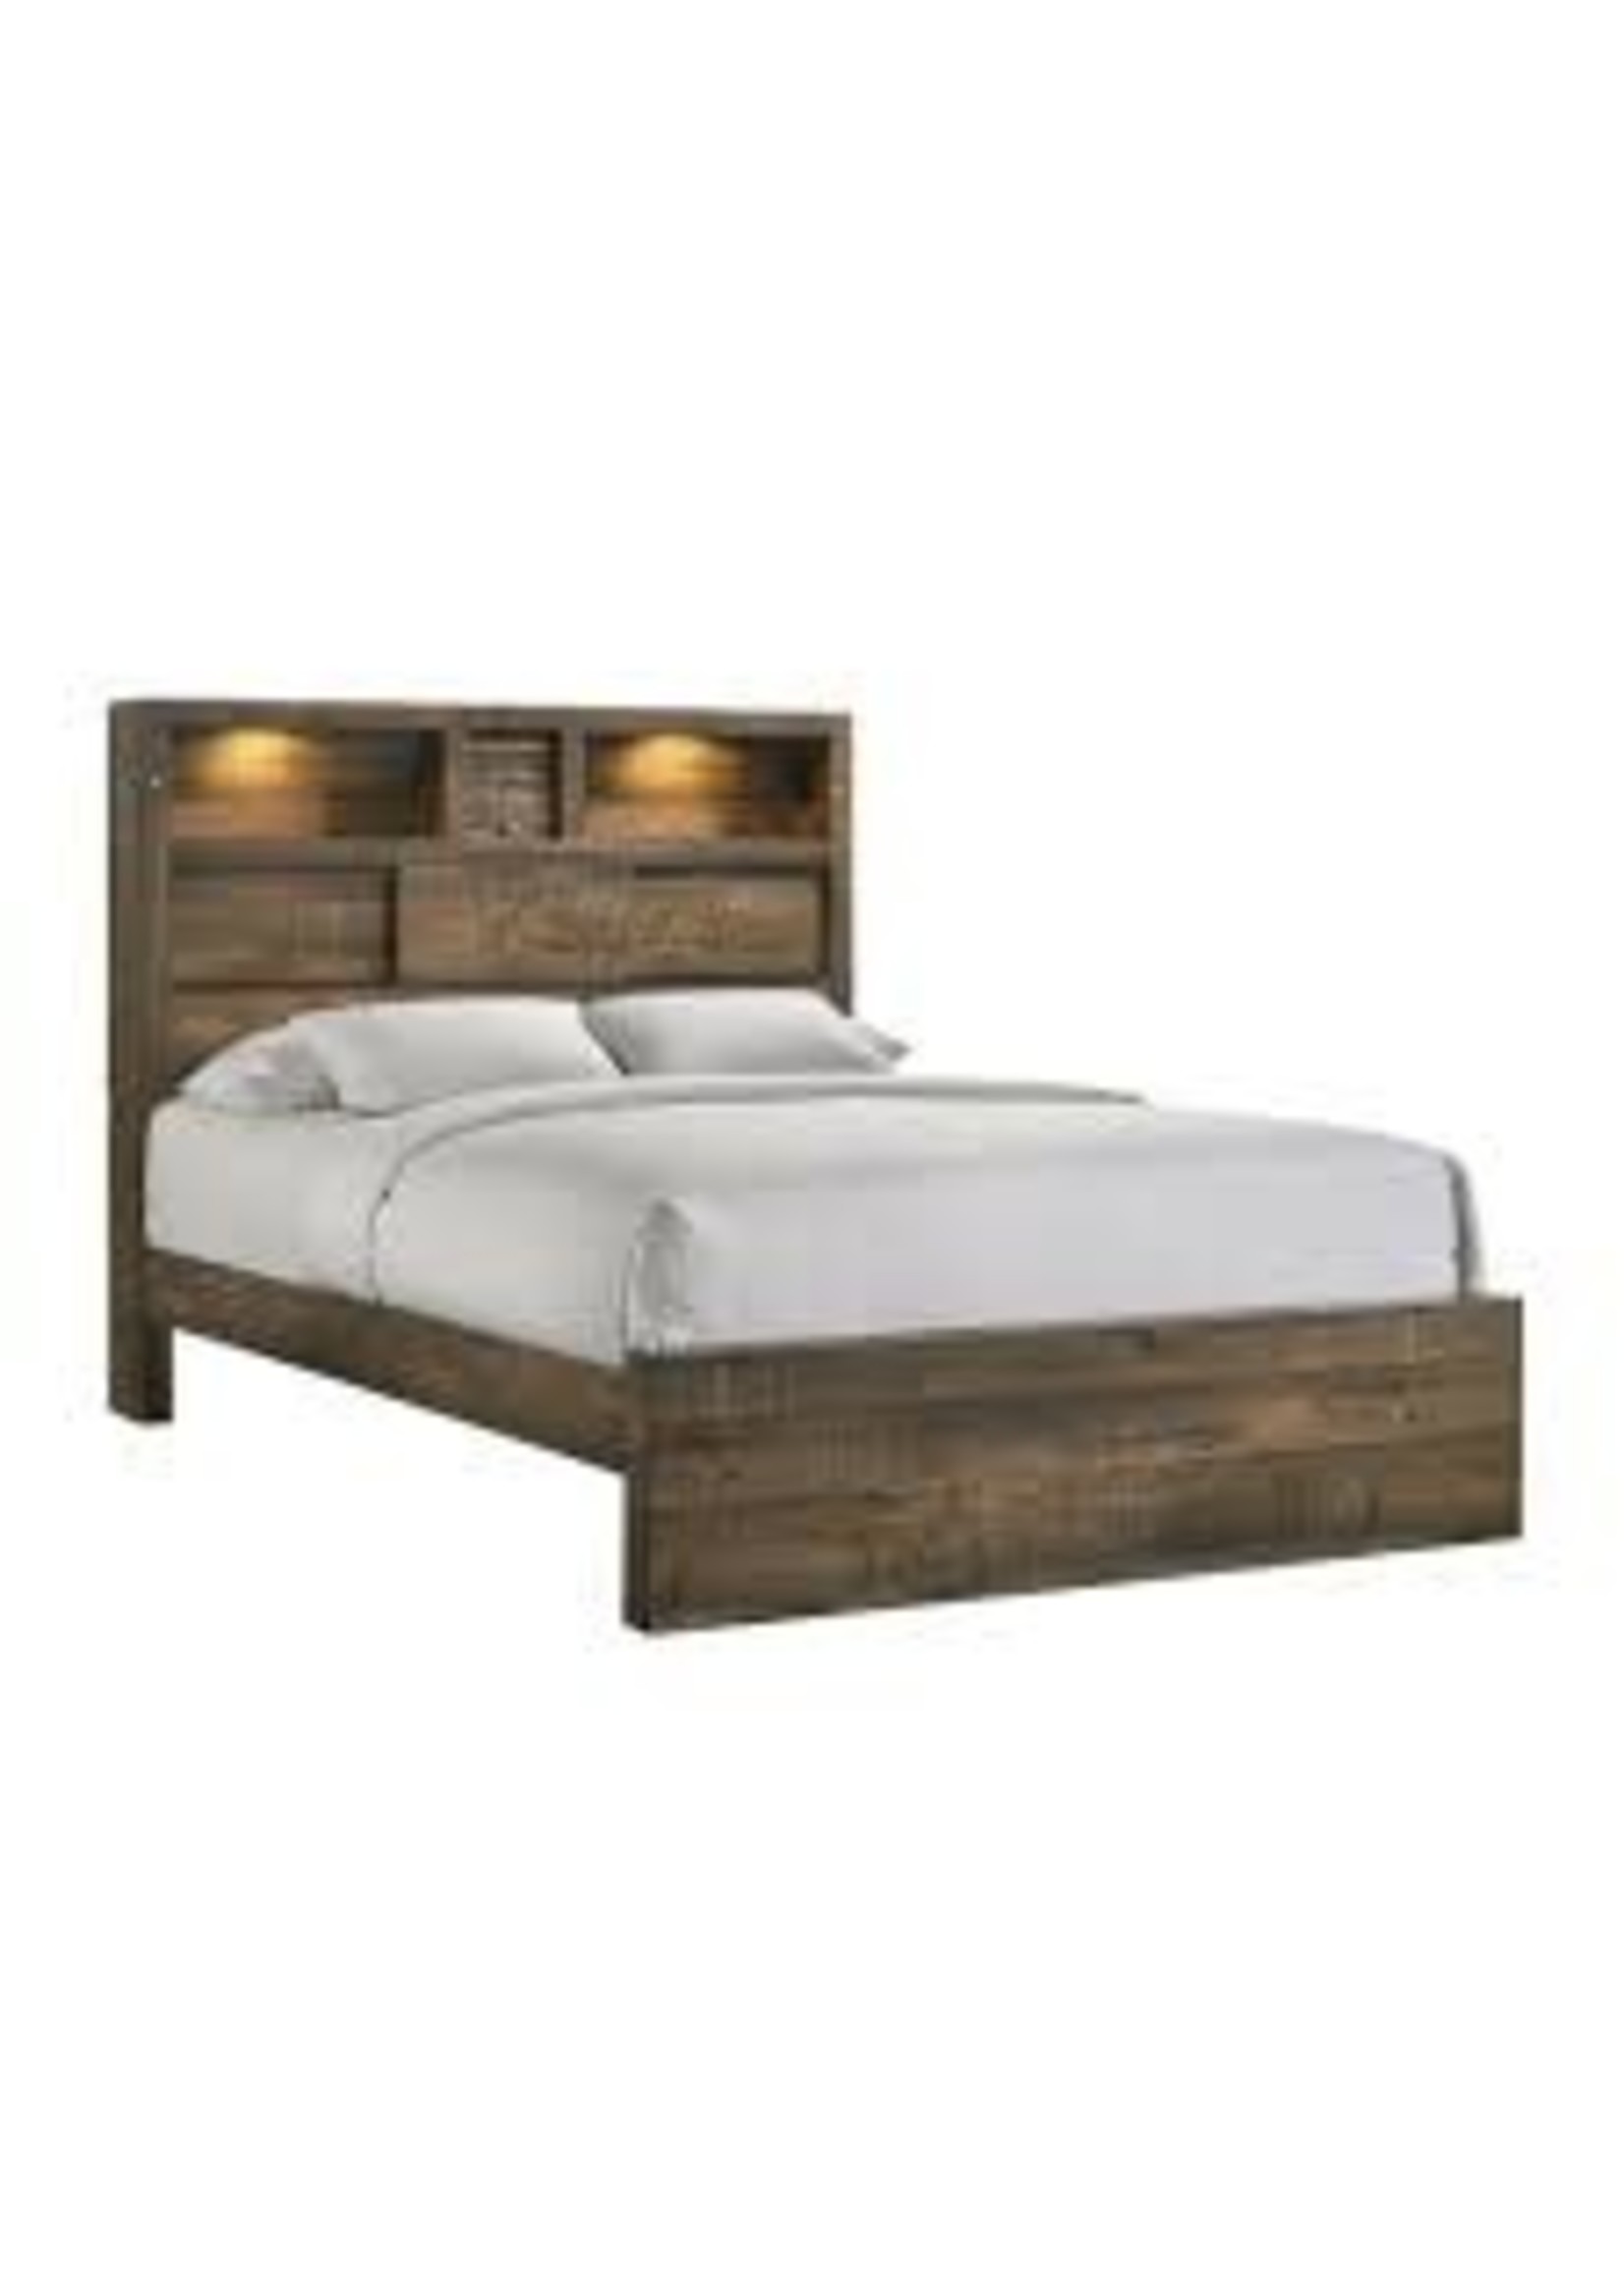 By520qb 5 0 Queen Bed Bailey Drift, Bed Frame With Speakers